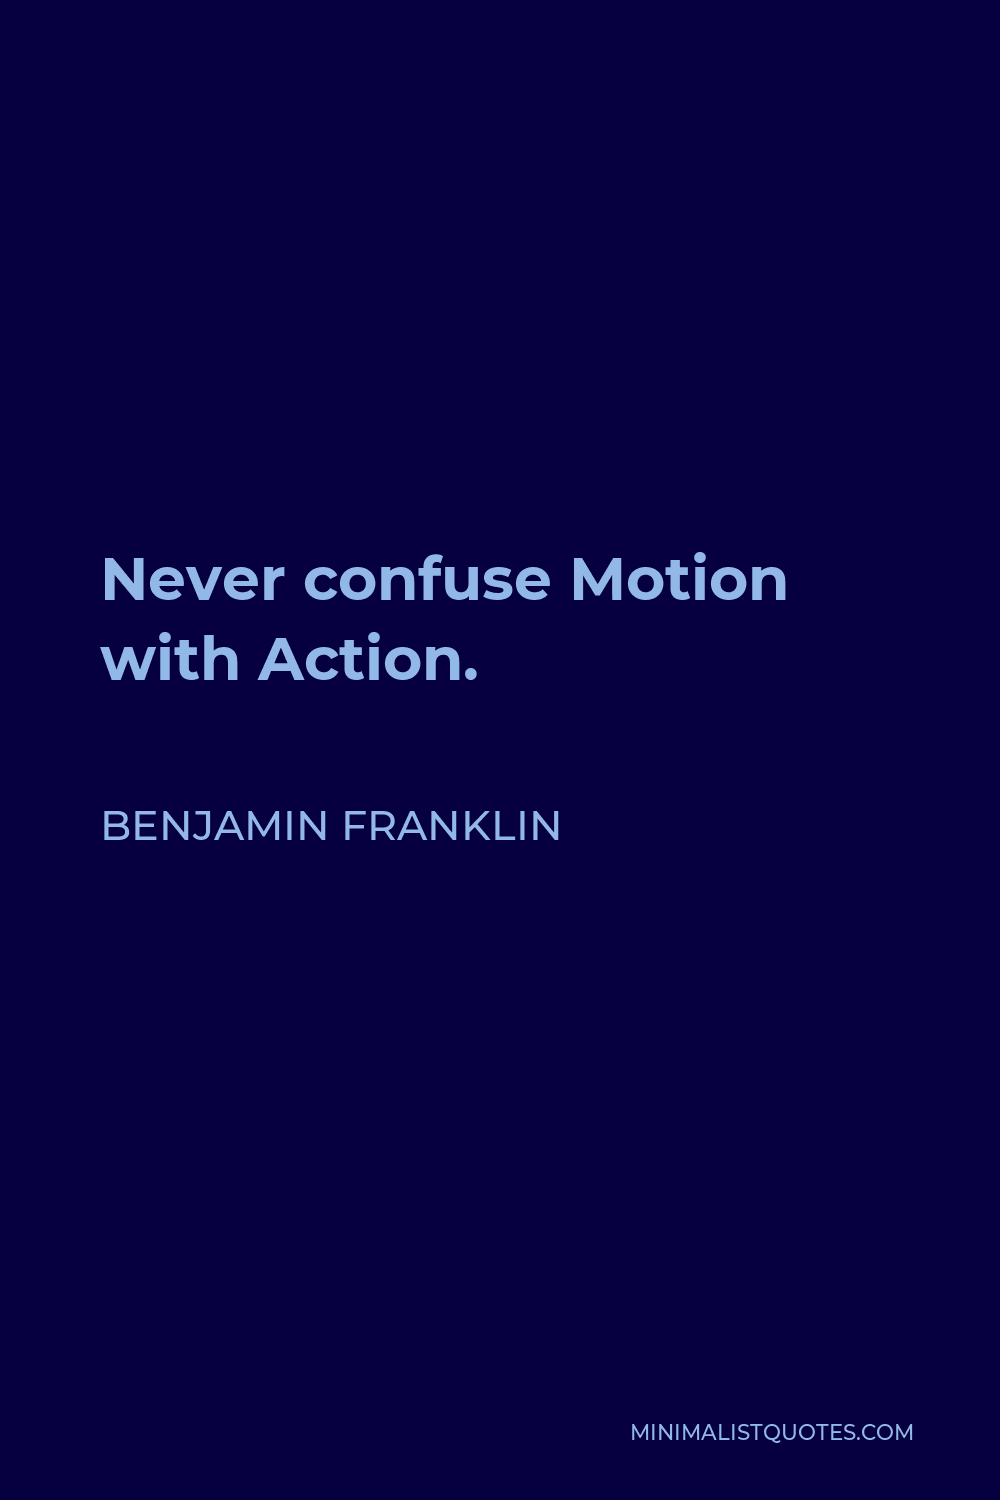 Benjamin Franklin Quote - Never confuse Motion with Action.